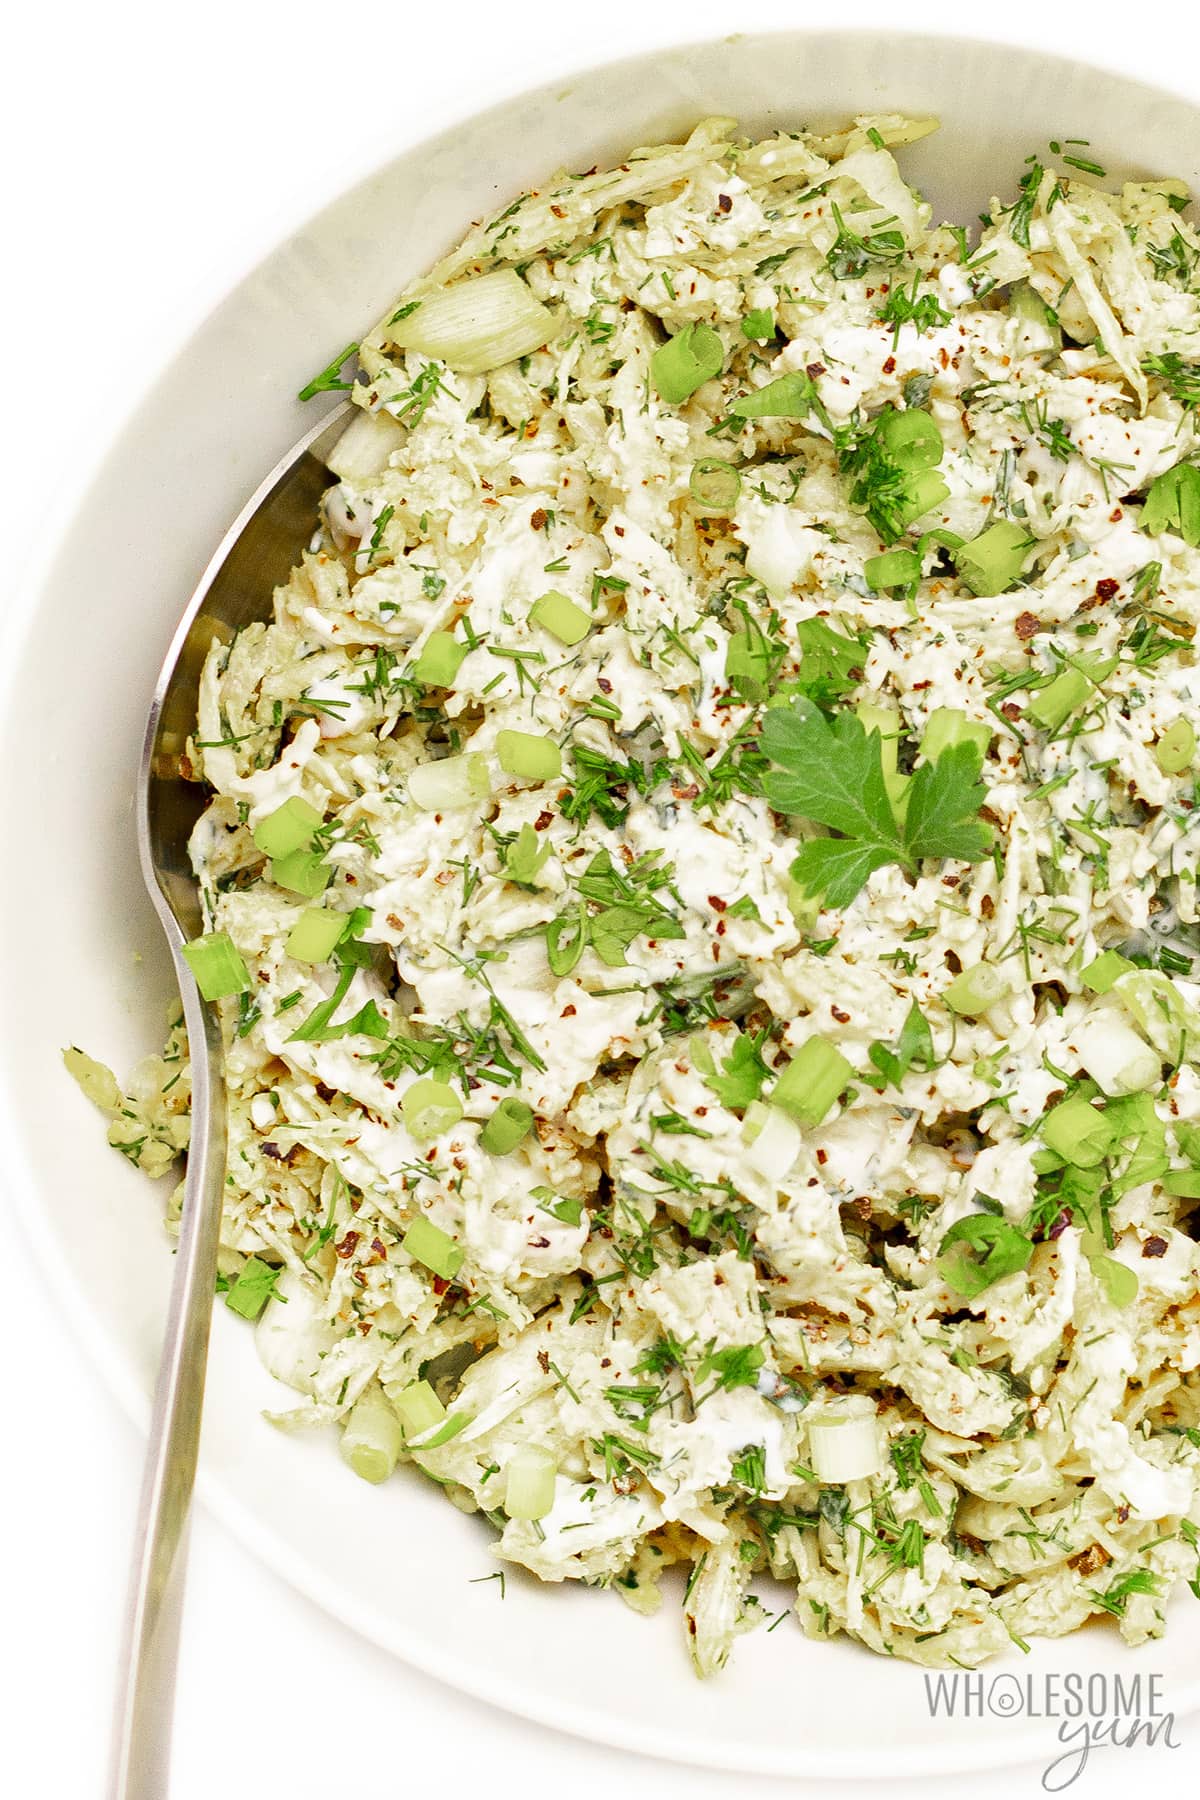 Chicken Salad Without Celery: Crunch-Free Chicken Salad Recipes